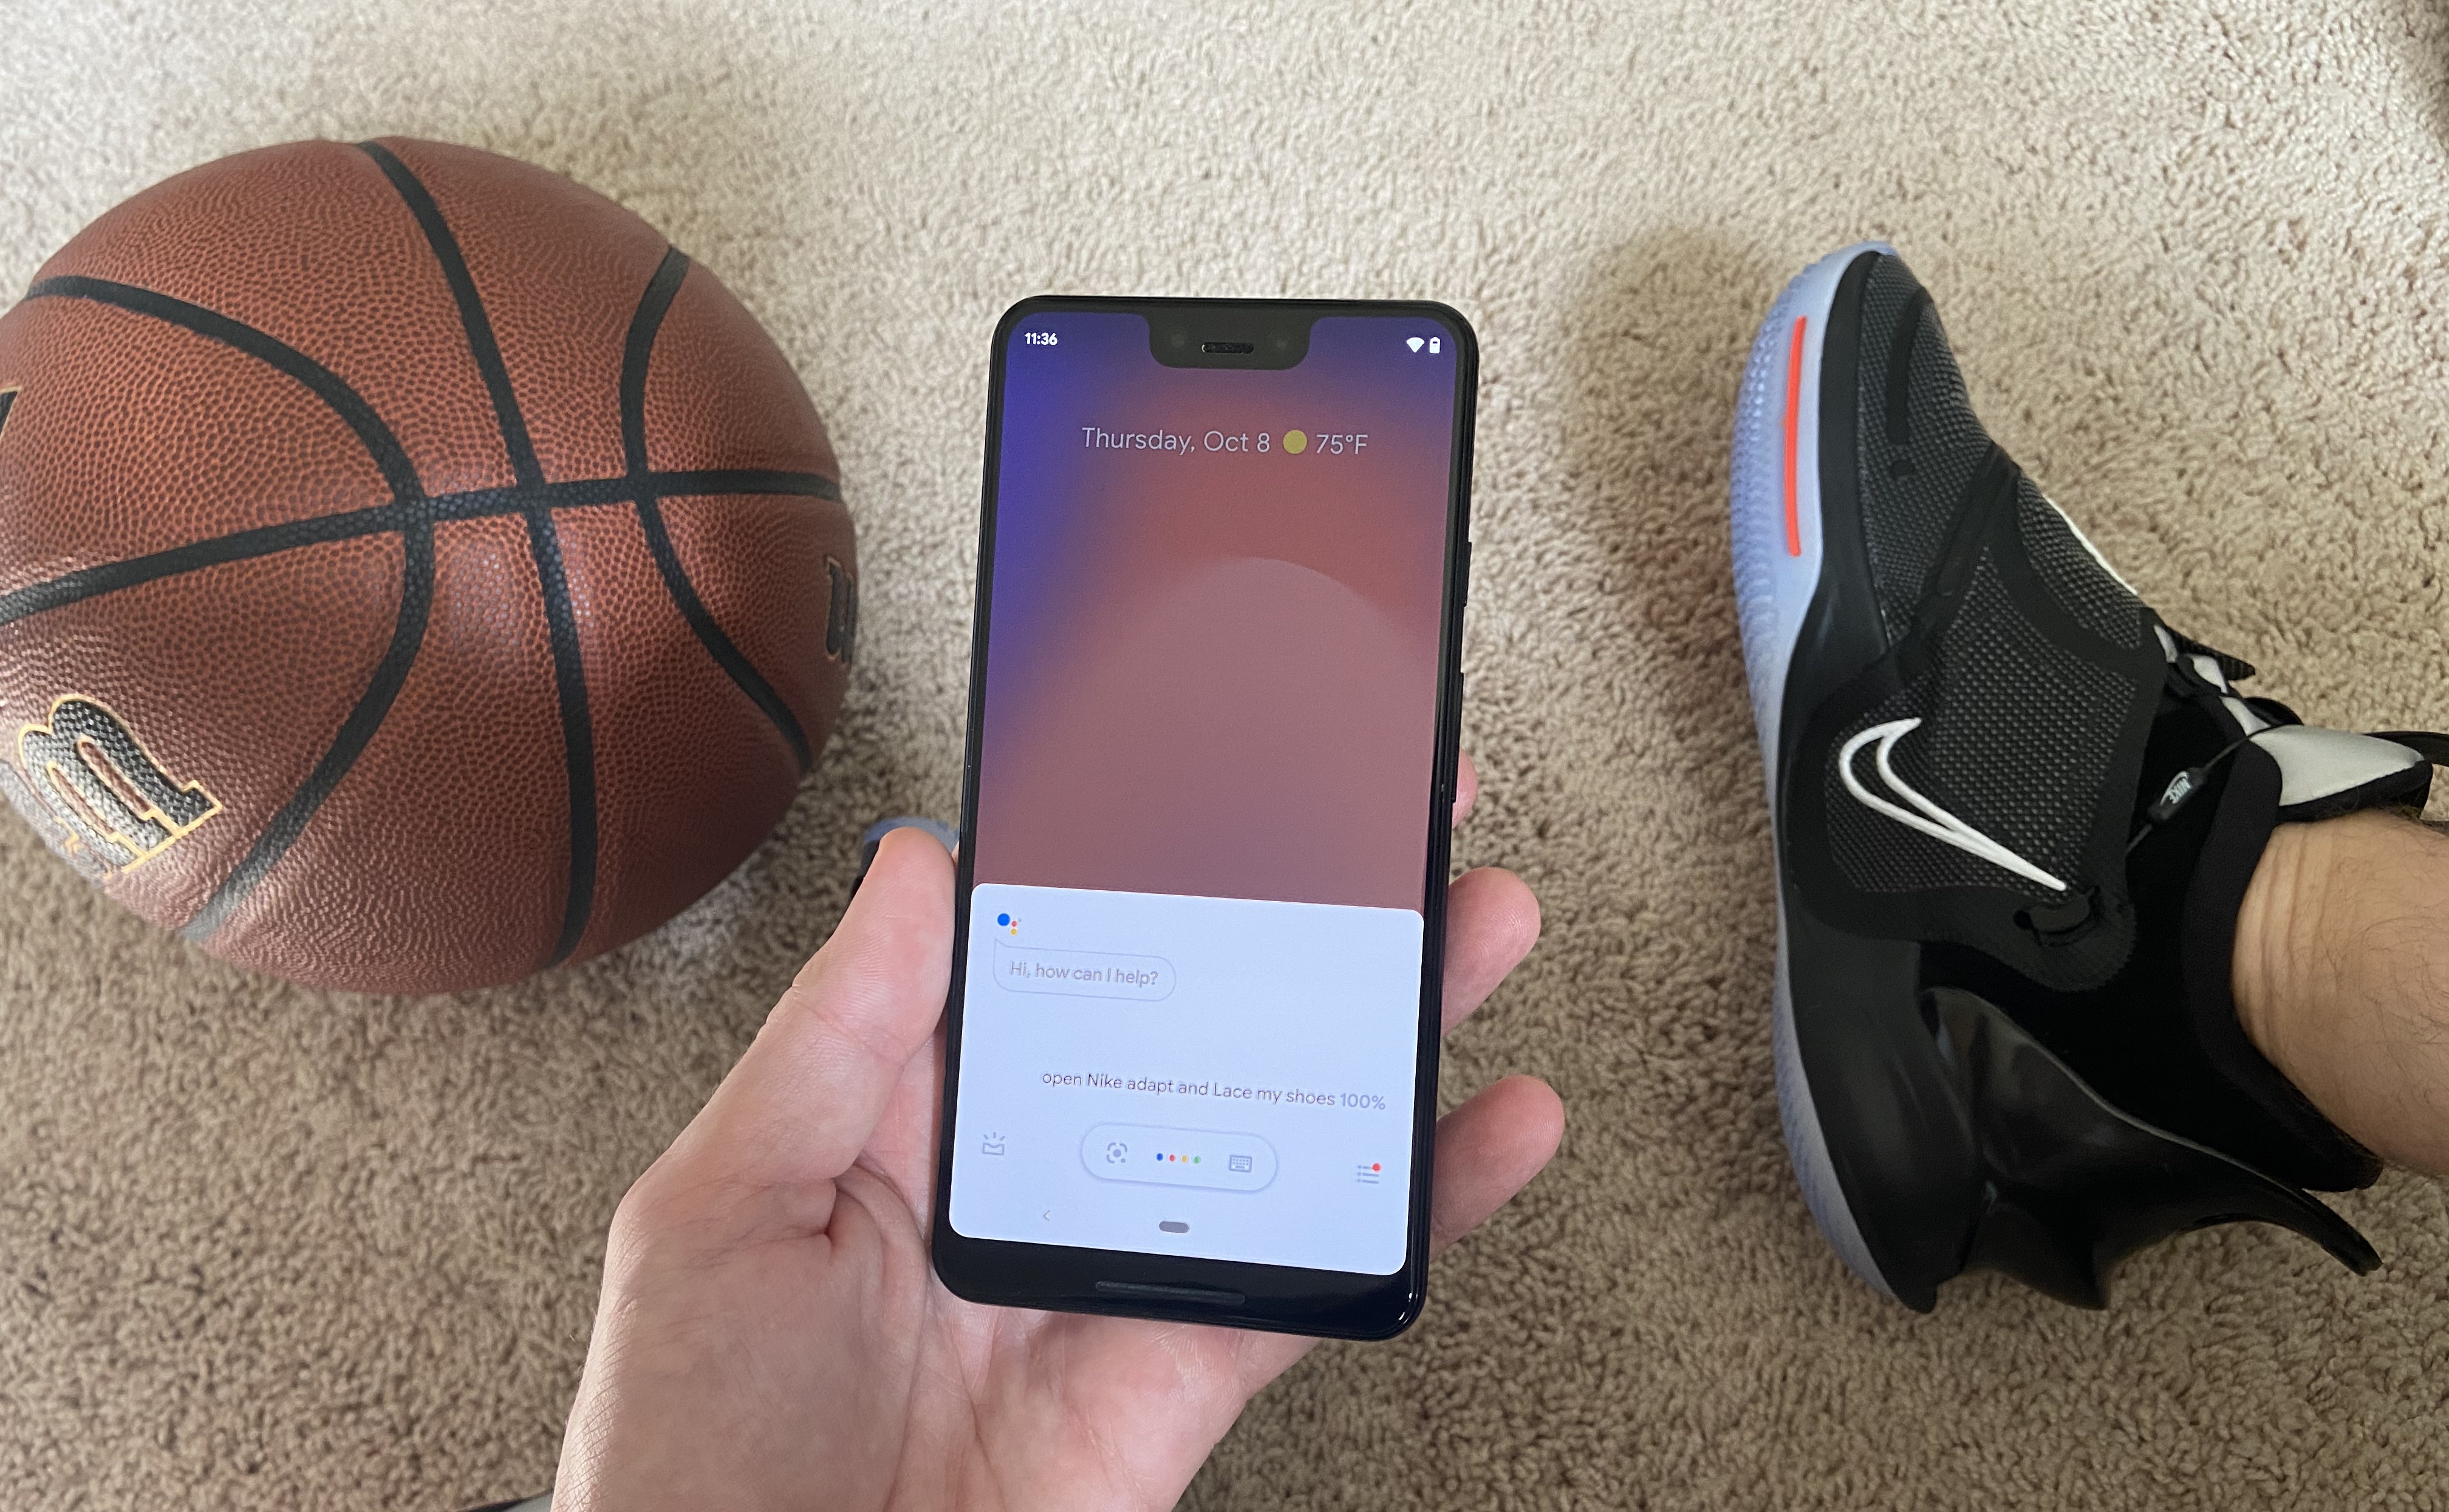 Google Assistant can now tie your shoes 